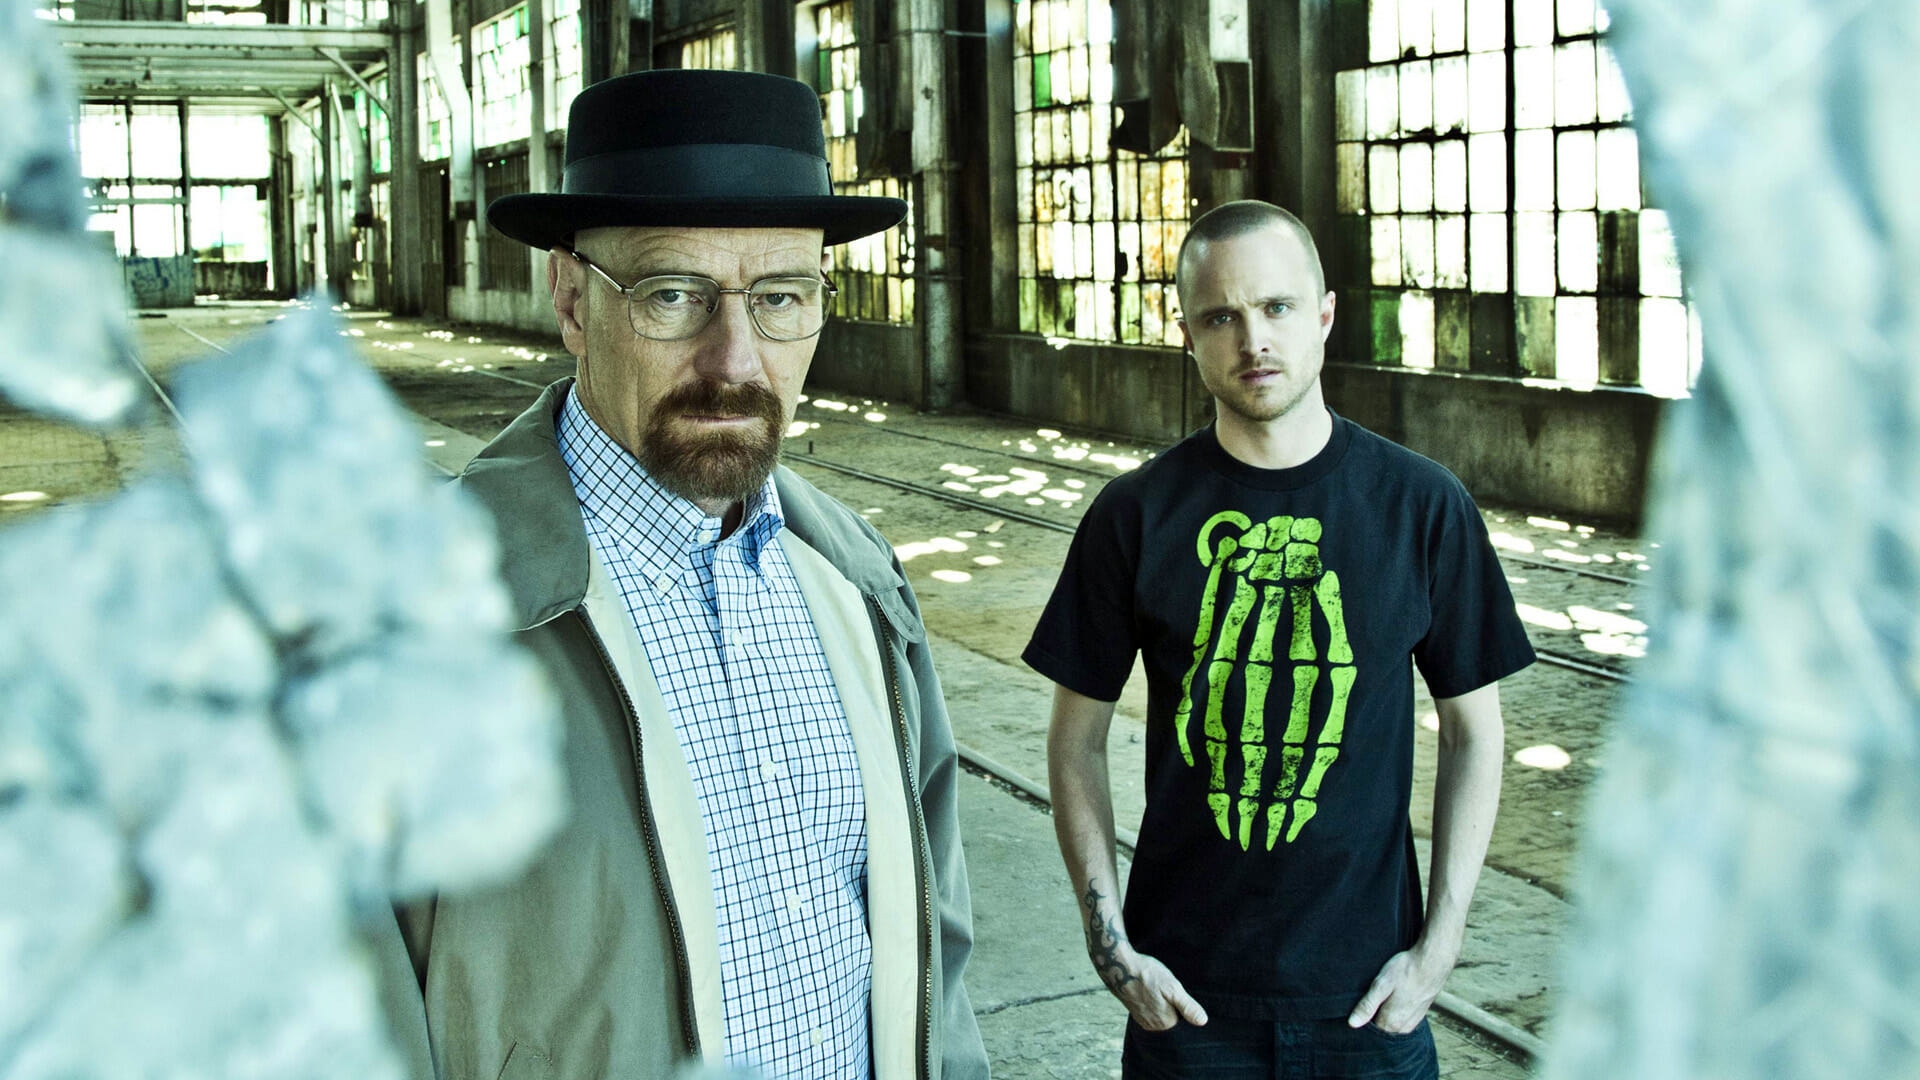 Bryan Cranston and Aaron Paul as their Breaking Bad Characters